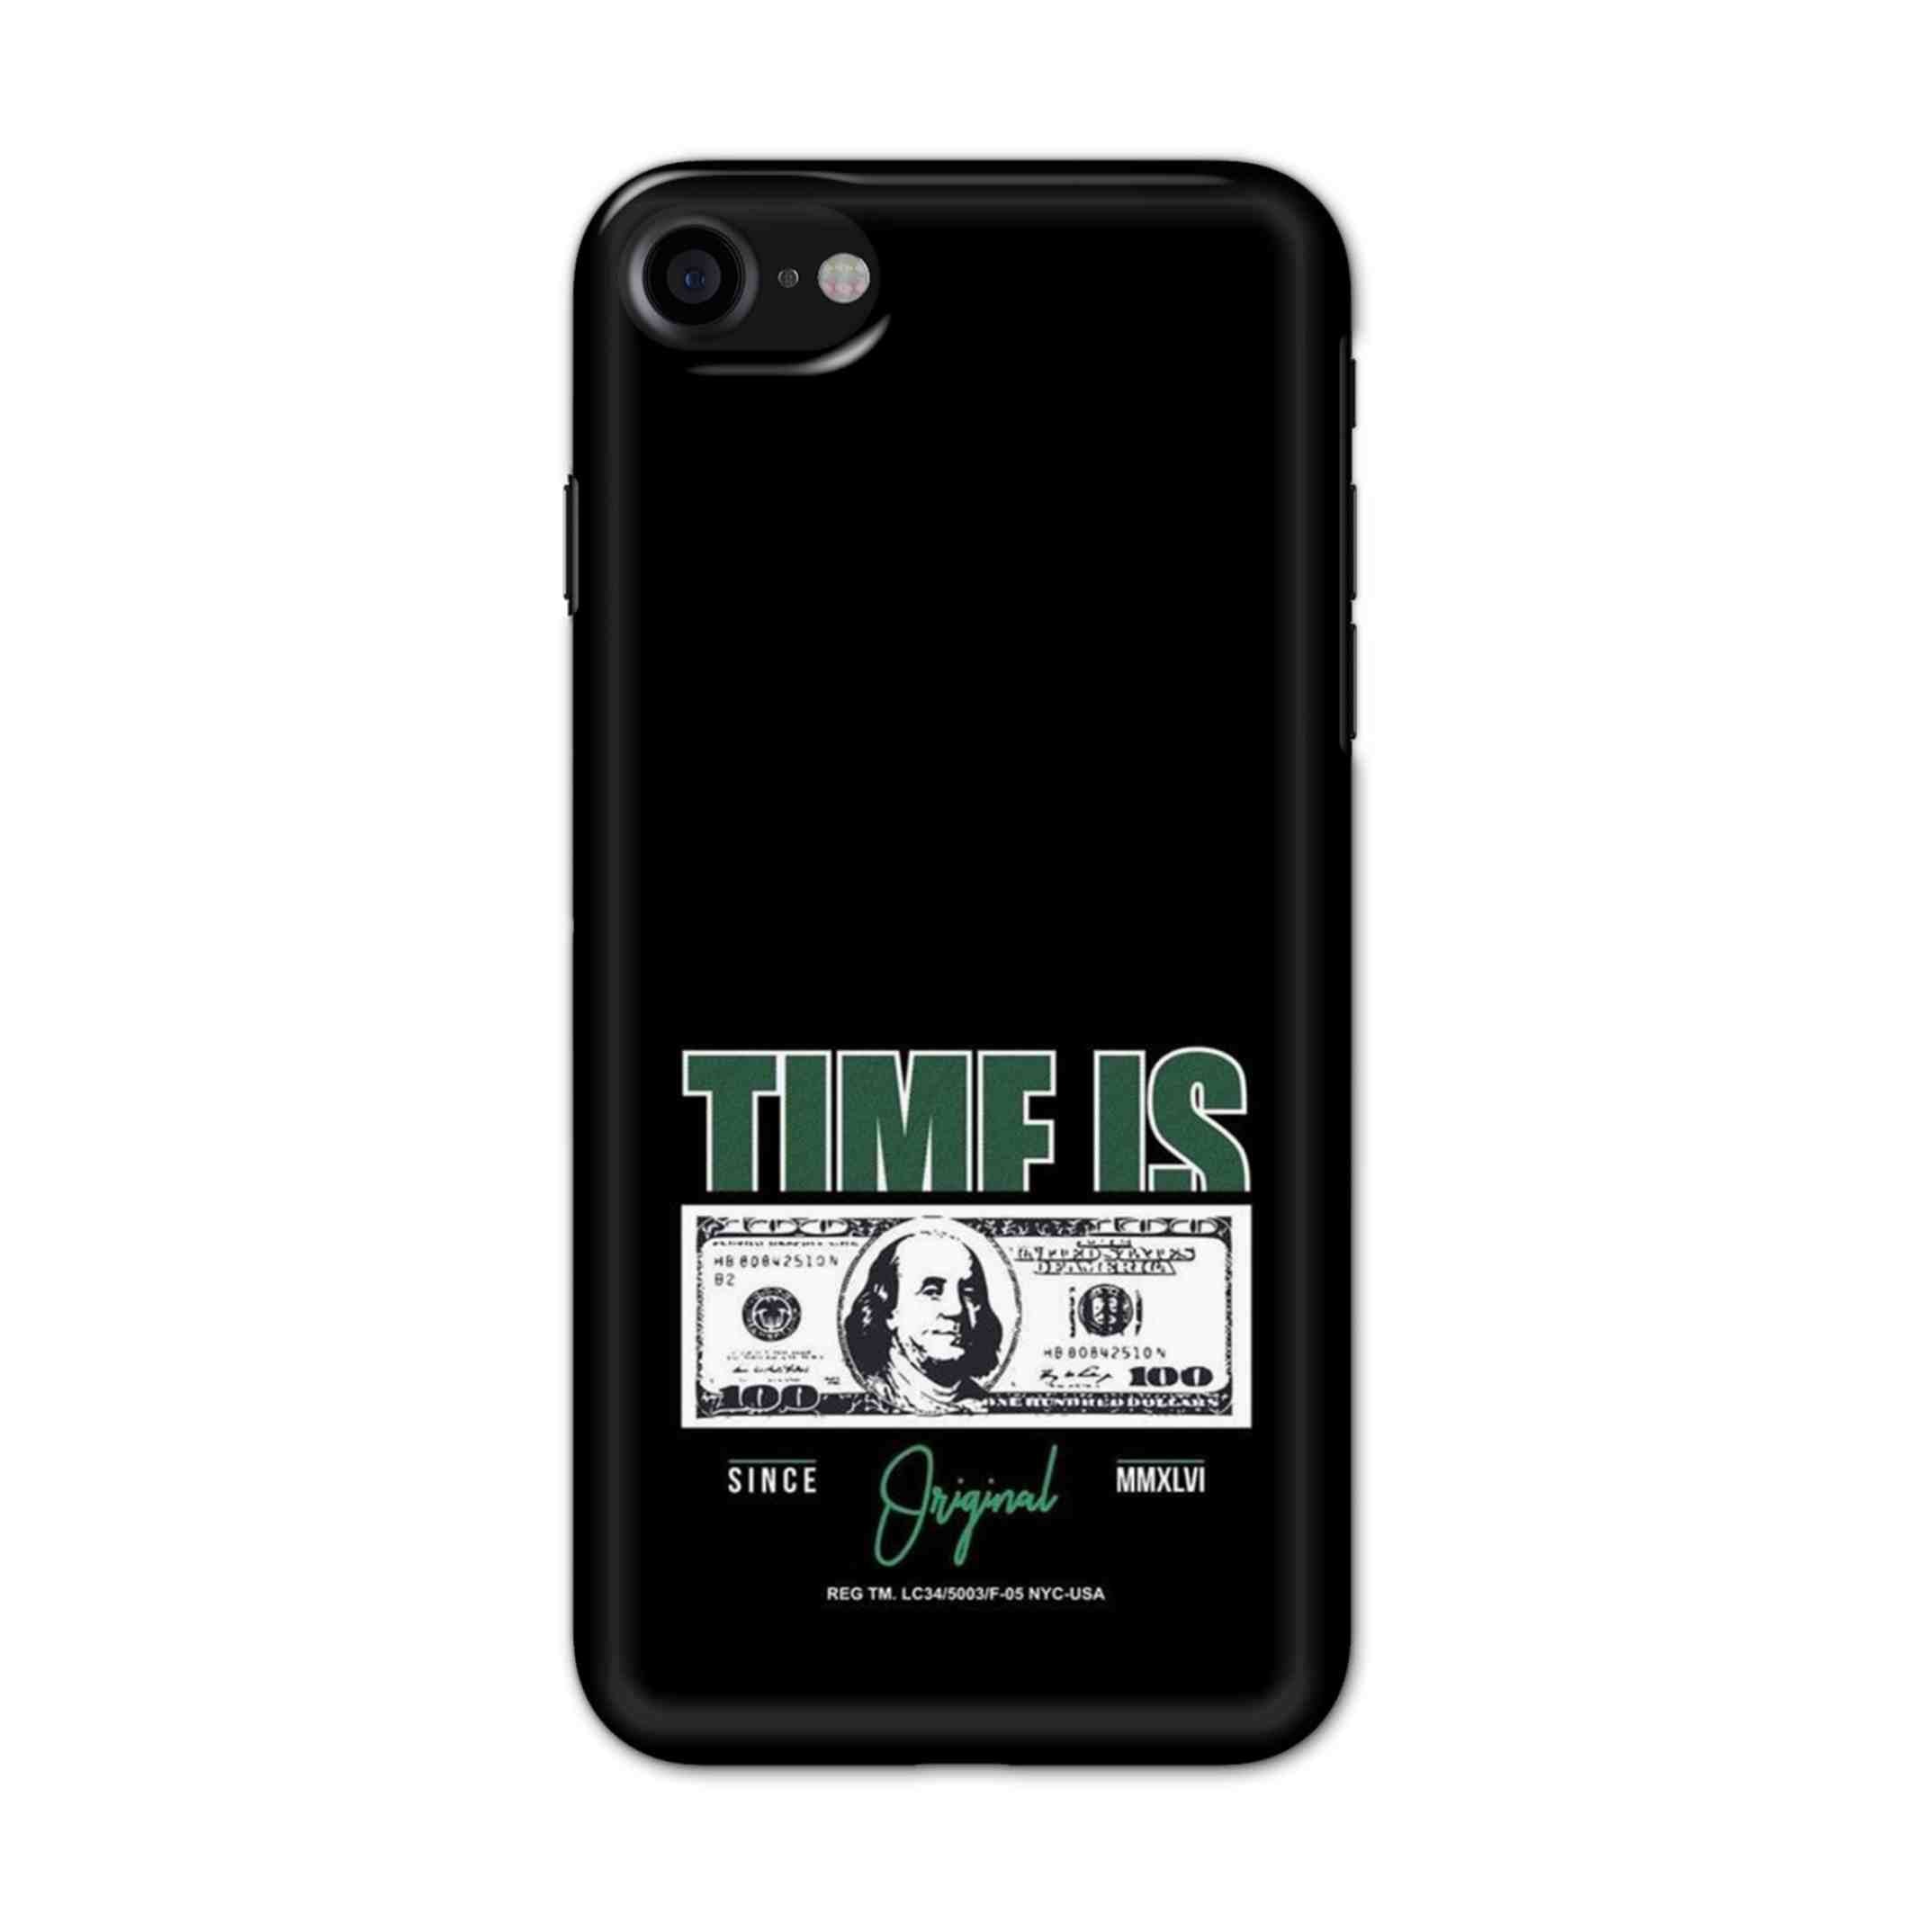 Buy Time Is Money Hard Back Mobile Phone Case/Cover For iPhone 7 / 8 Online